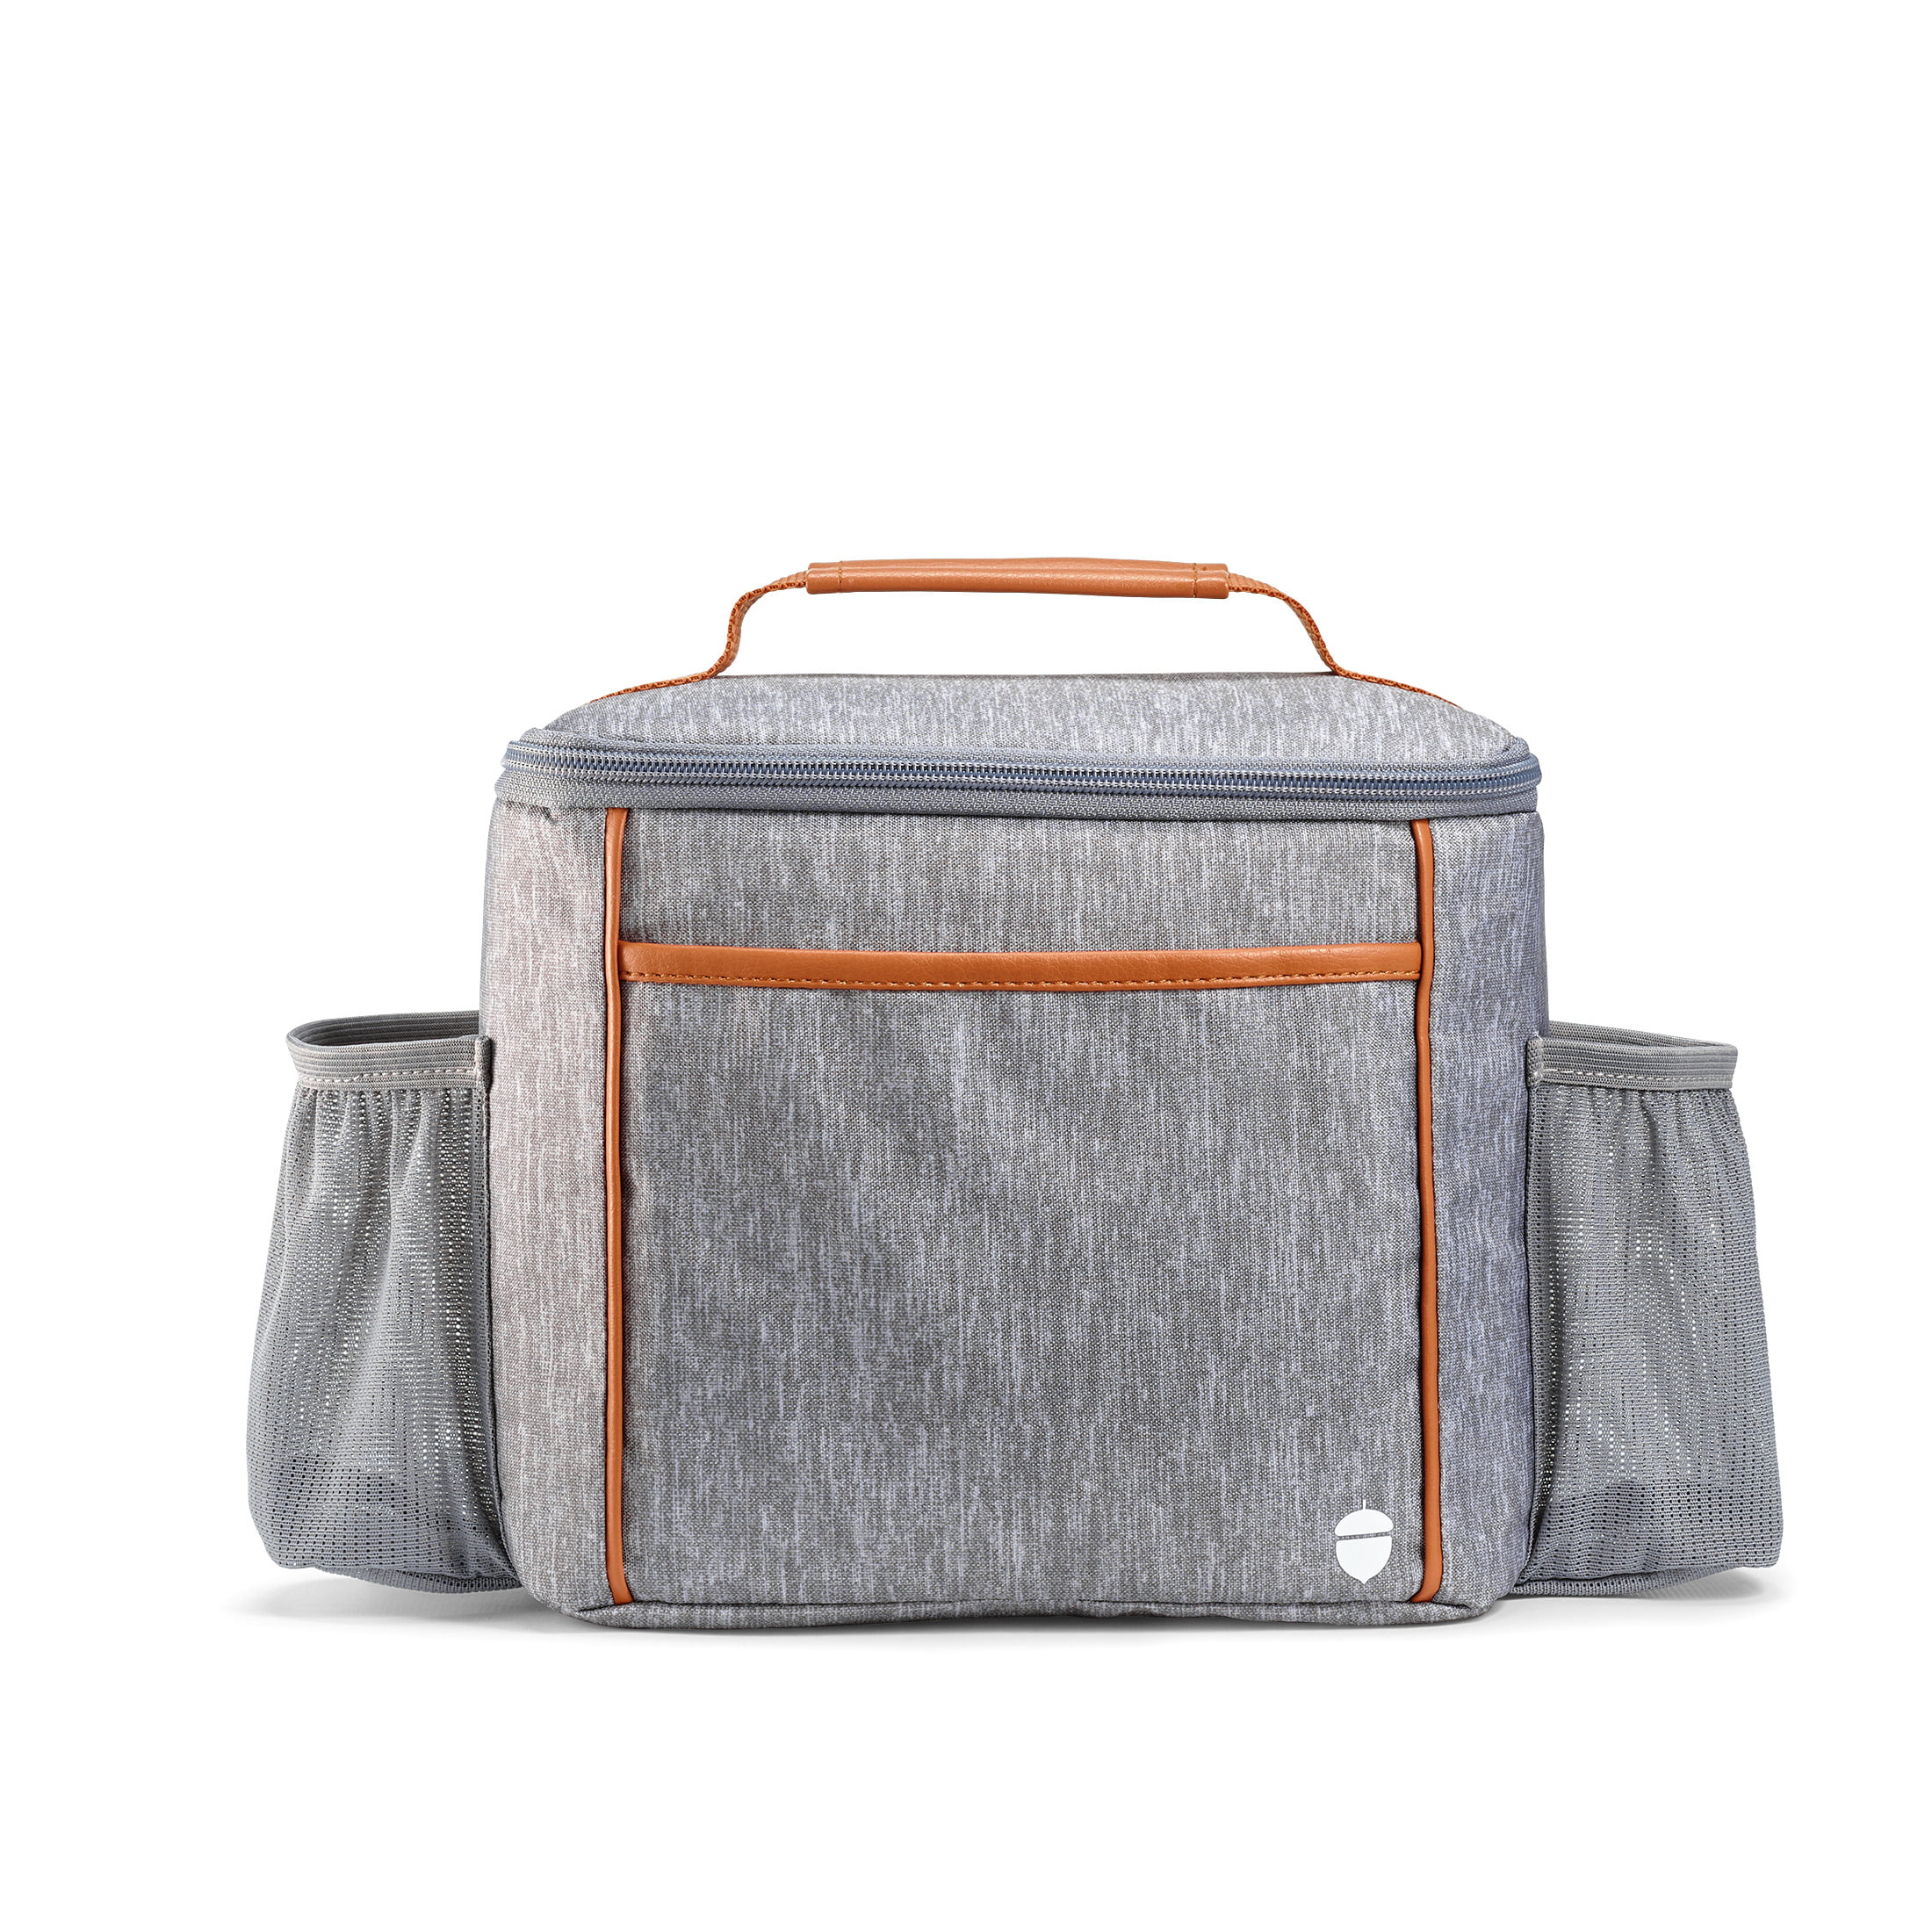 Acorn St. Vertical Insulated Lunch Bag for Men, Women and Kids, Gray